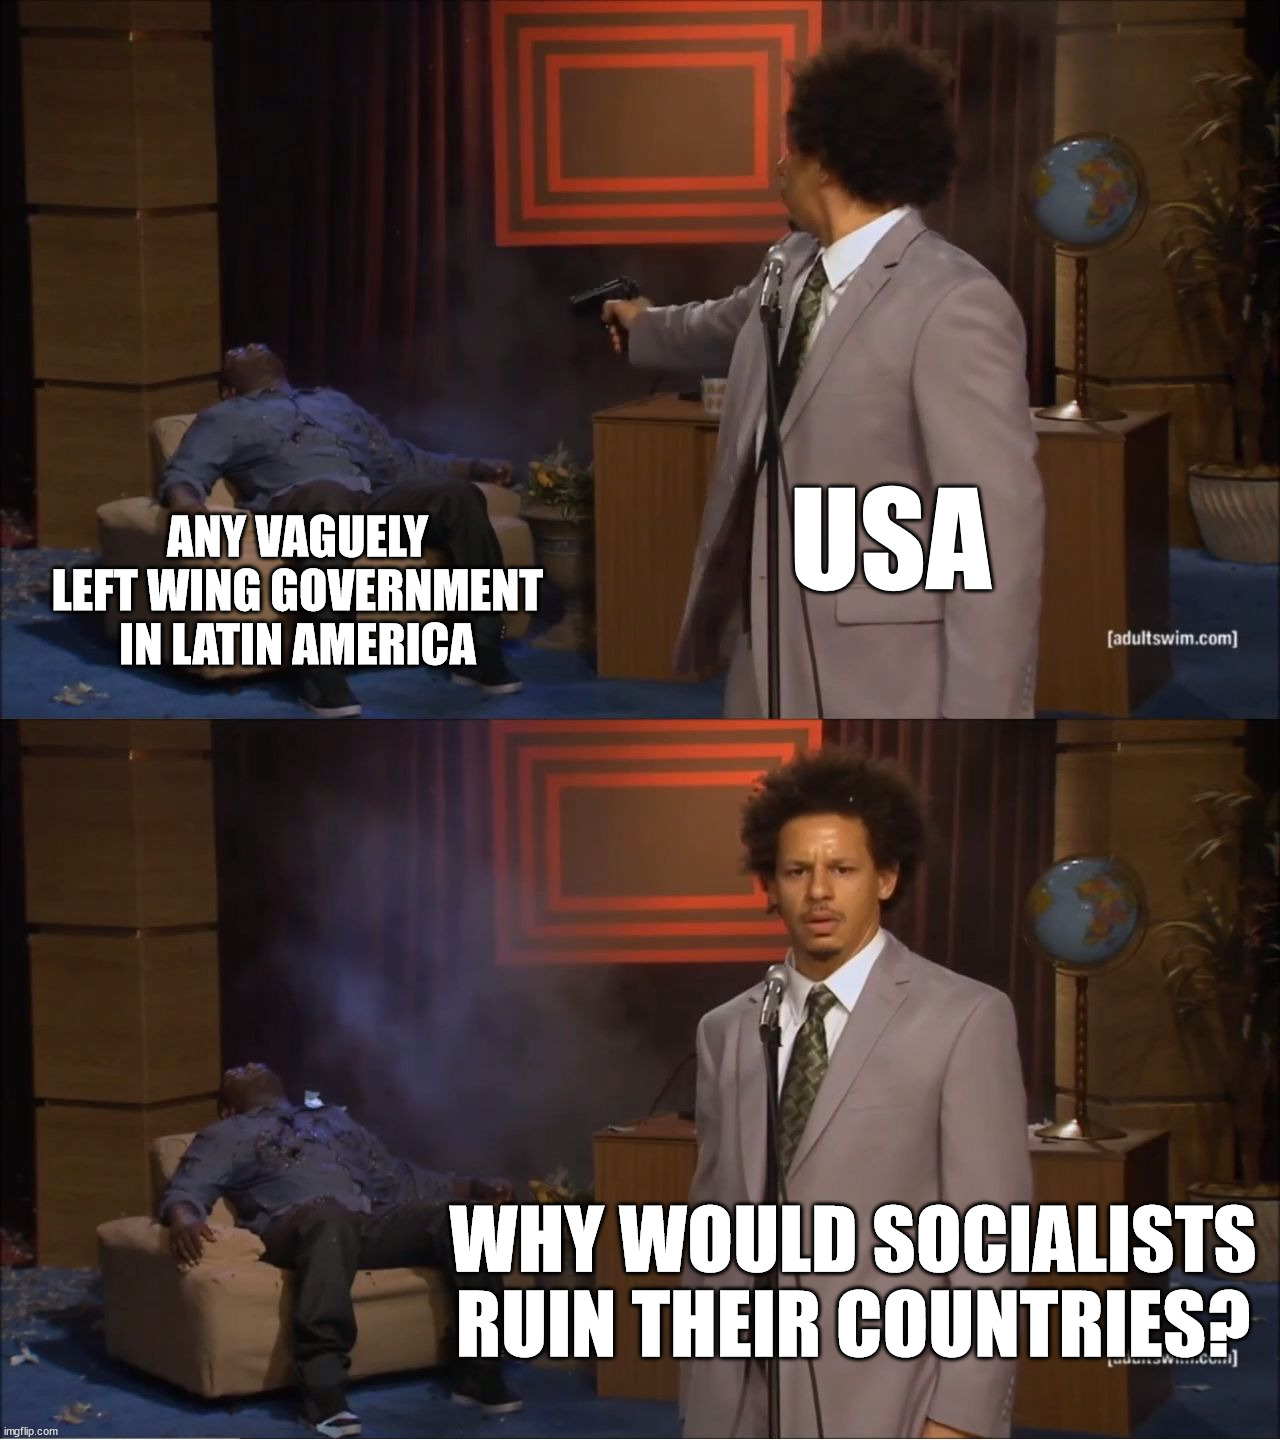 The Monroe Doctrine | USA; ANY VAGUELY LEFT WING GOVERNMENT IN LATIN AMERICA; WHY WOULD SOCIALISTS RUIN THEIR COUNTRIES? | image tagged in memes,who killed hannibal,latin america,usa,american imperialism,monroe doctrine | made w/ Imgflip meme maker